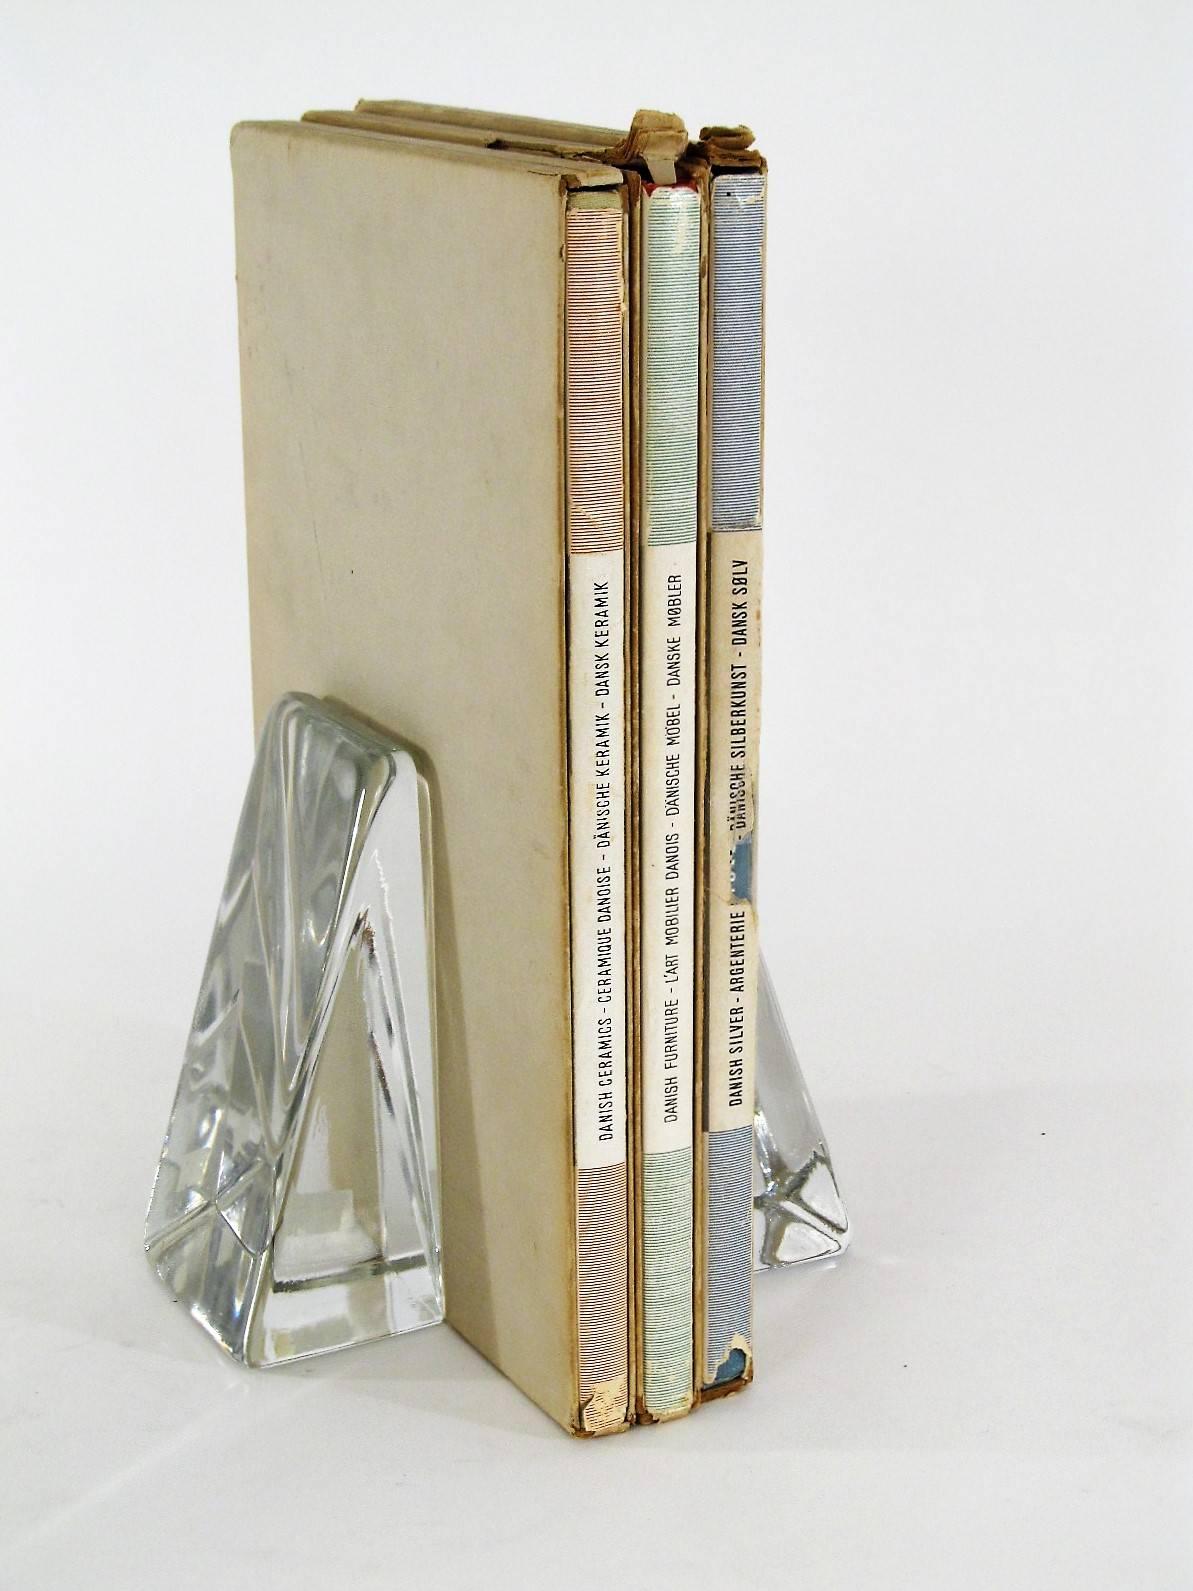 First edition full three volume set. Published in 1954-1955. Bindings and pages are in excellent condition. Dust Jackets and cases are there, but show considerable wear.